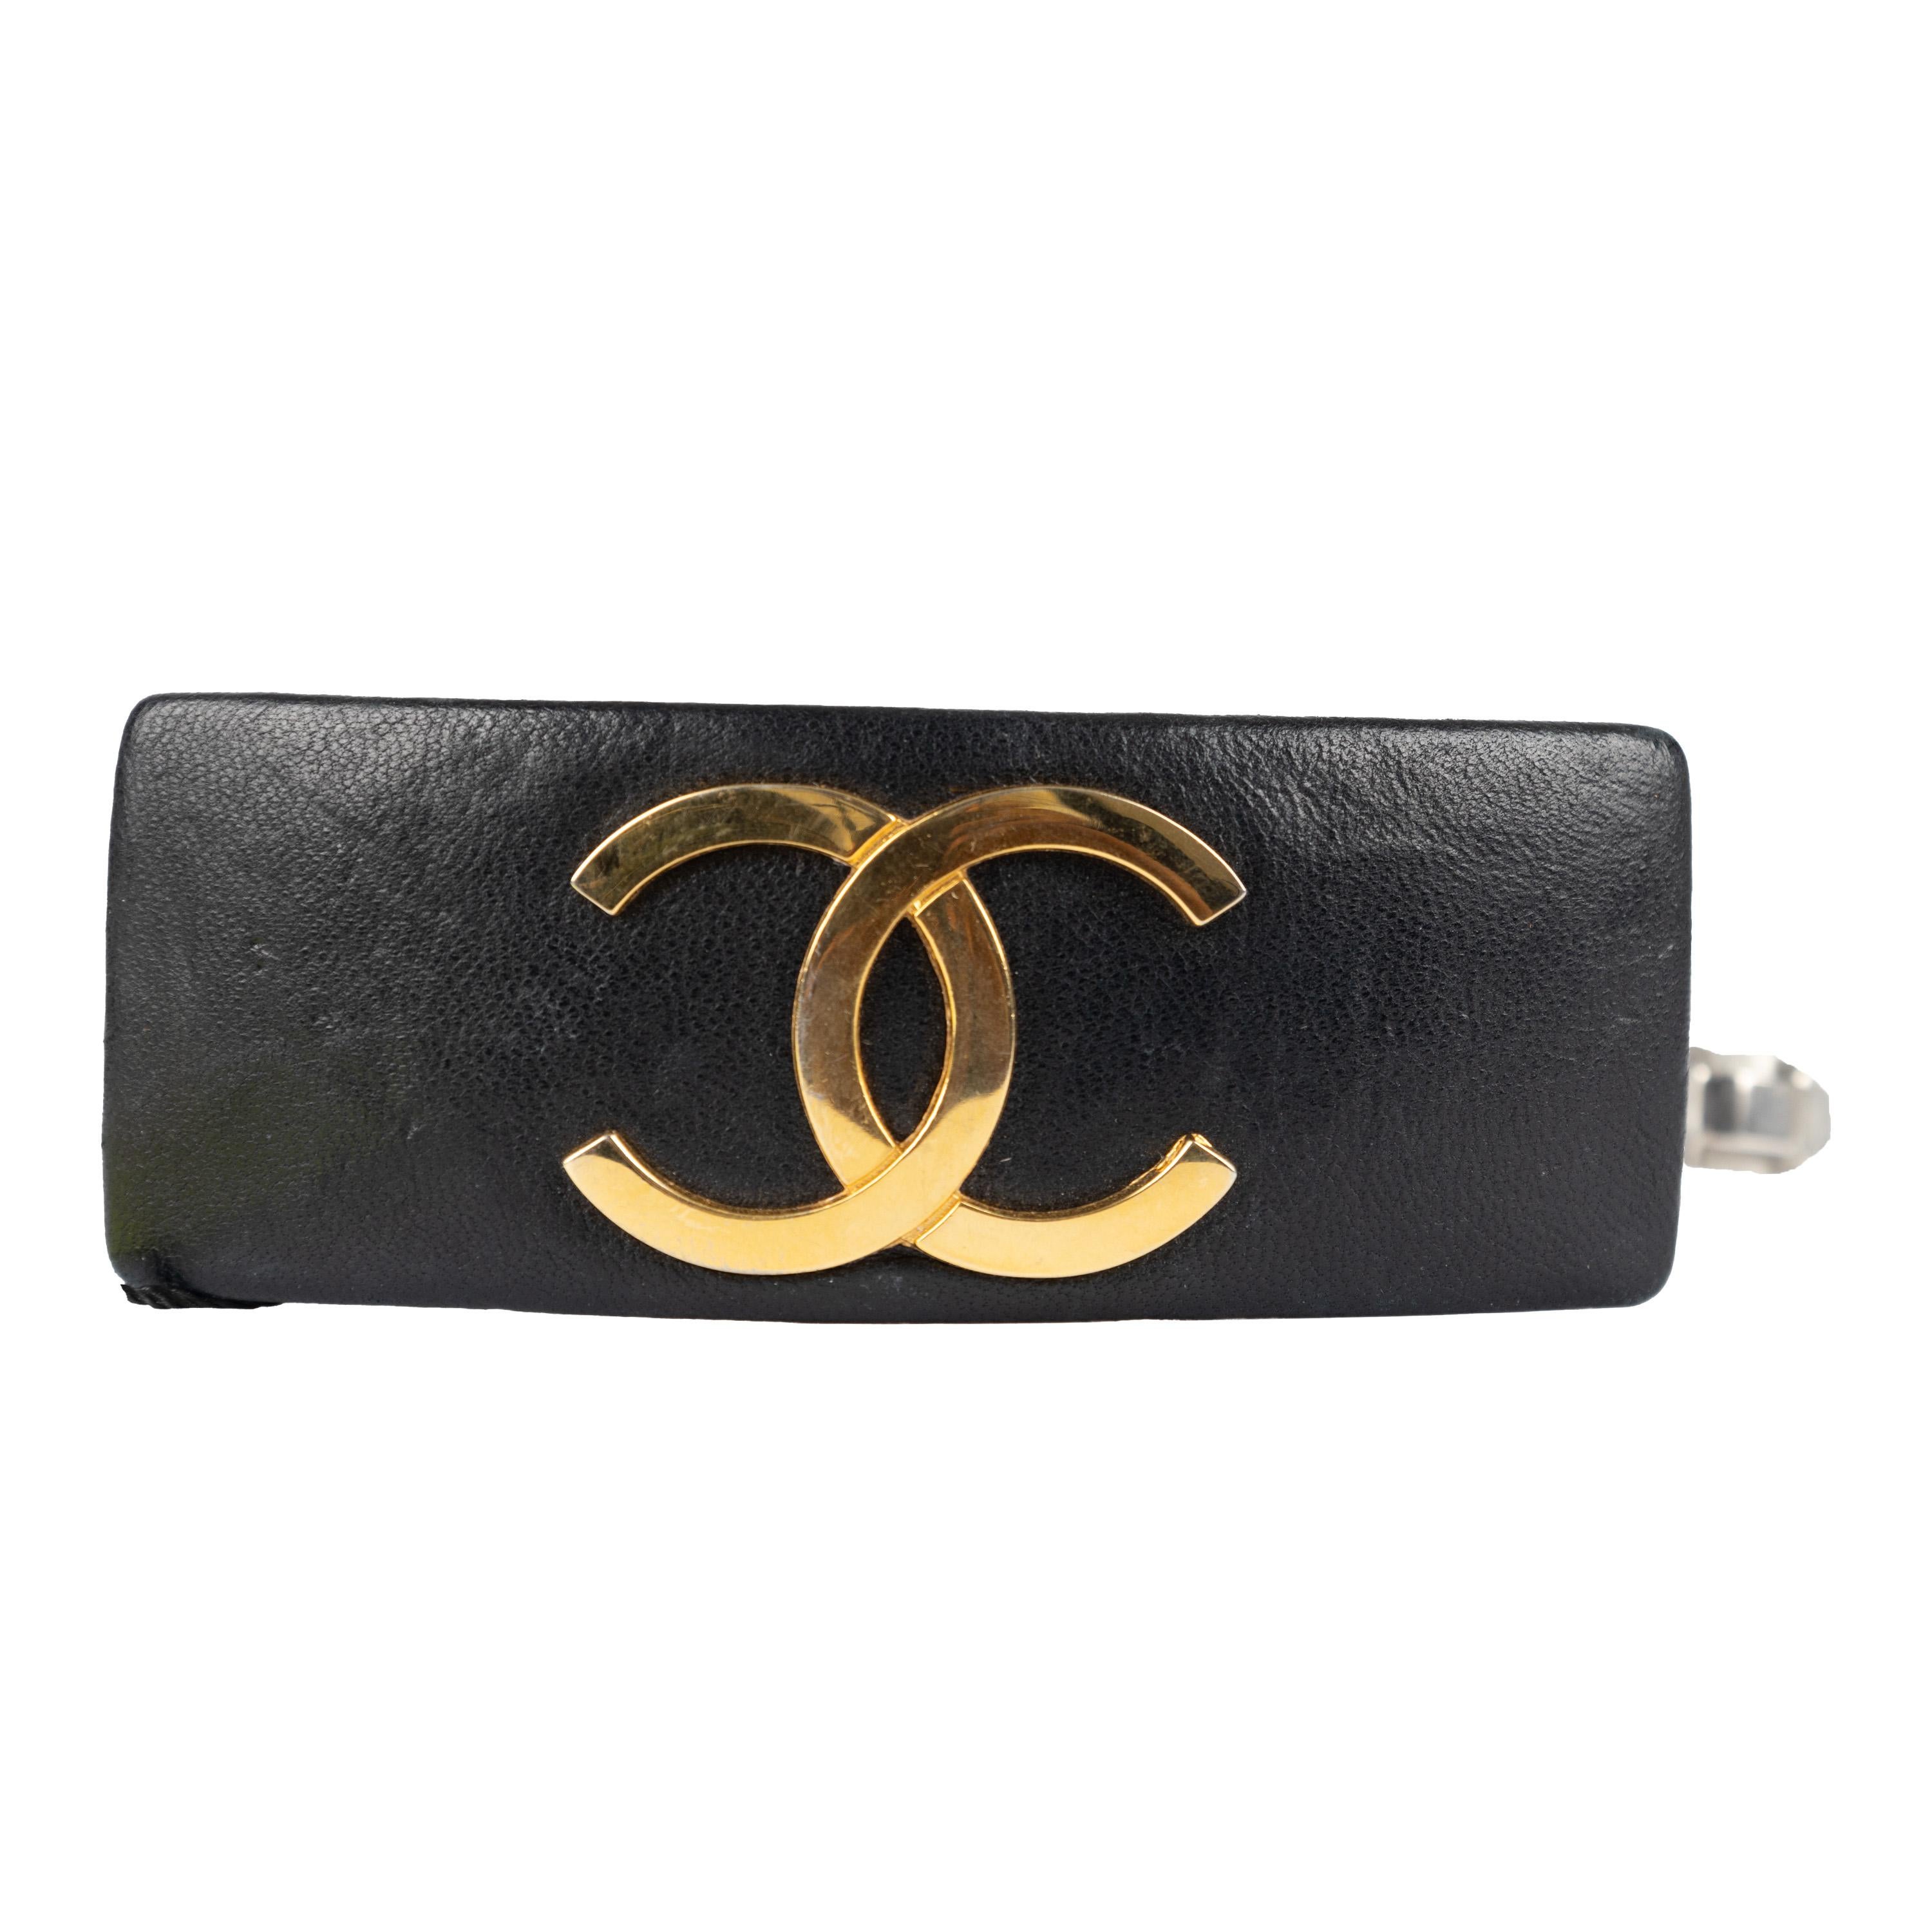 This Chanel hair clip is the ultimate vintage accessory. Crafted from black leather with the iconic Coco mark in gold, the Chanel Coco Mark Valletta Hairclip is sure to elevate any look.

Remarks: There are signs of wear on the leather. The clip has